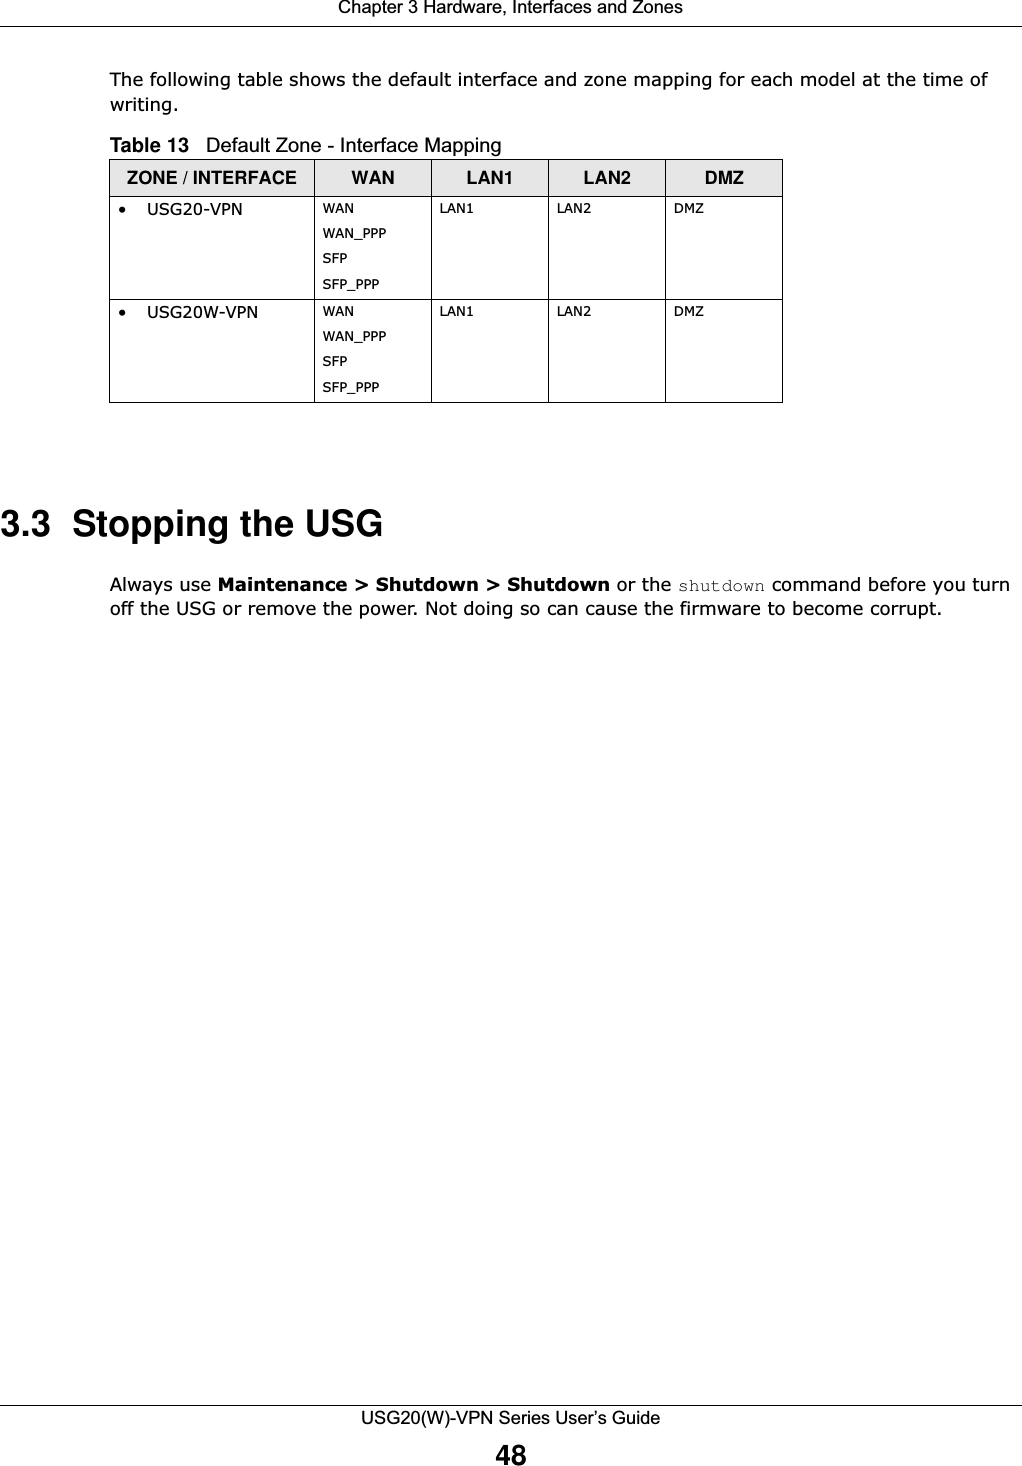 Chapter 3 Hardware, Interfaces and ZonesUSG20(W)-VPN Series User’s Guide48The following table shows the default interface and zone mapping for each model at the time of writing.       3.3  Stopping the USGAlways use Maintenance &gt; Shutdown &gt; Shutdown or the shutdown command before you turn off the USG or remove the power. Not doing so can cause the firmware to become corrupt.Table 13   Default Zone - Interface Mapping ZONE / INTERFACE WAN LAN1 LAN2 DMZ• USG20-VPN WANWAN_PPPSFPSFP_PPPLAN1 LAN2 DMZ• USG20W-VPN WANWAN_PPPSFPSFP_PPPLAN1 LAN2 DMZ